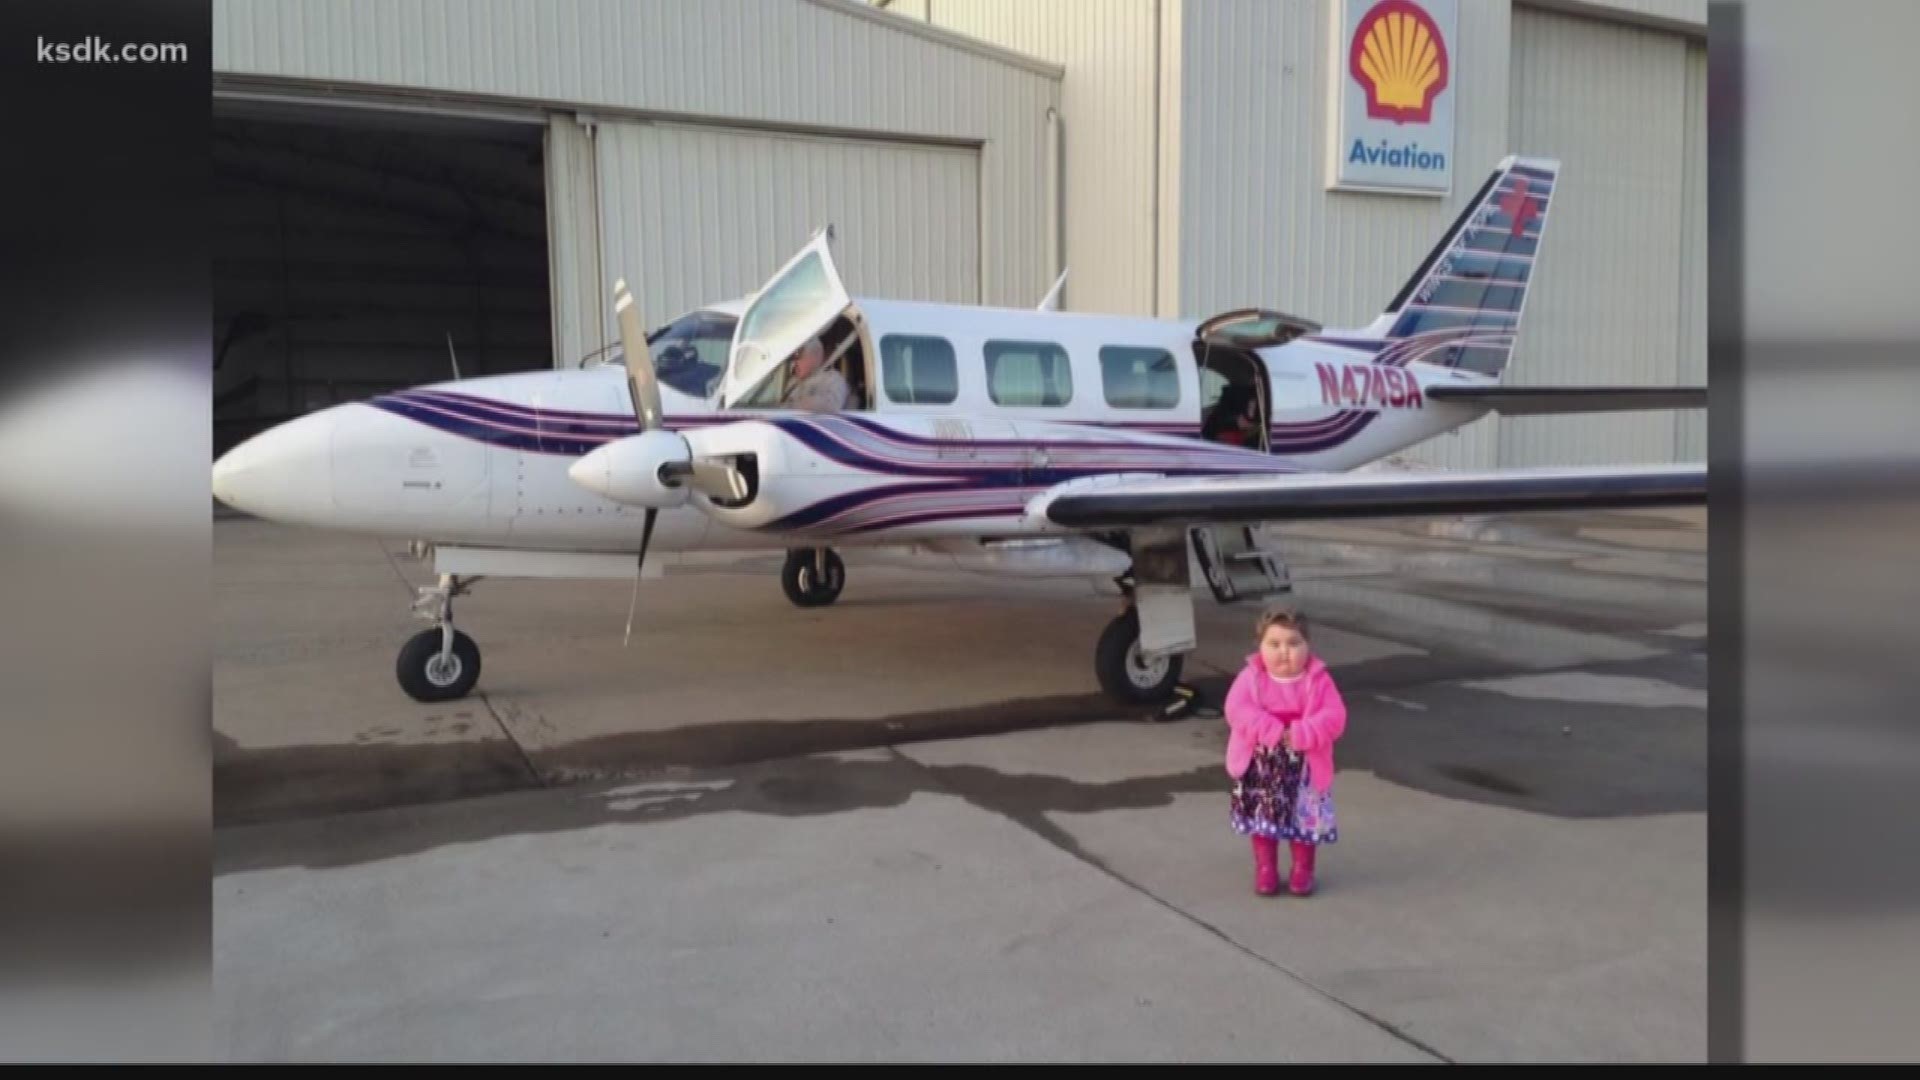 When Claire was three years old she had a life-threatening illness and needed to travel to get her treatment. Jay Rickmeyer and Wings of Hope came to the rescue.